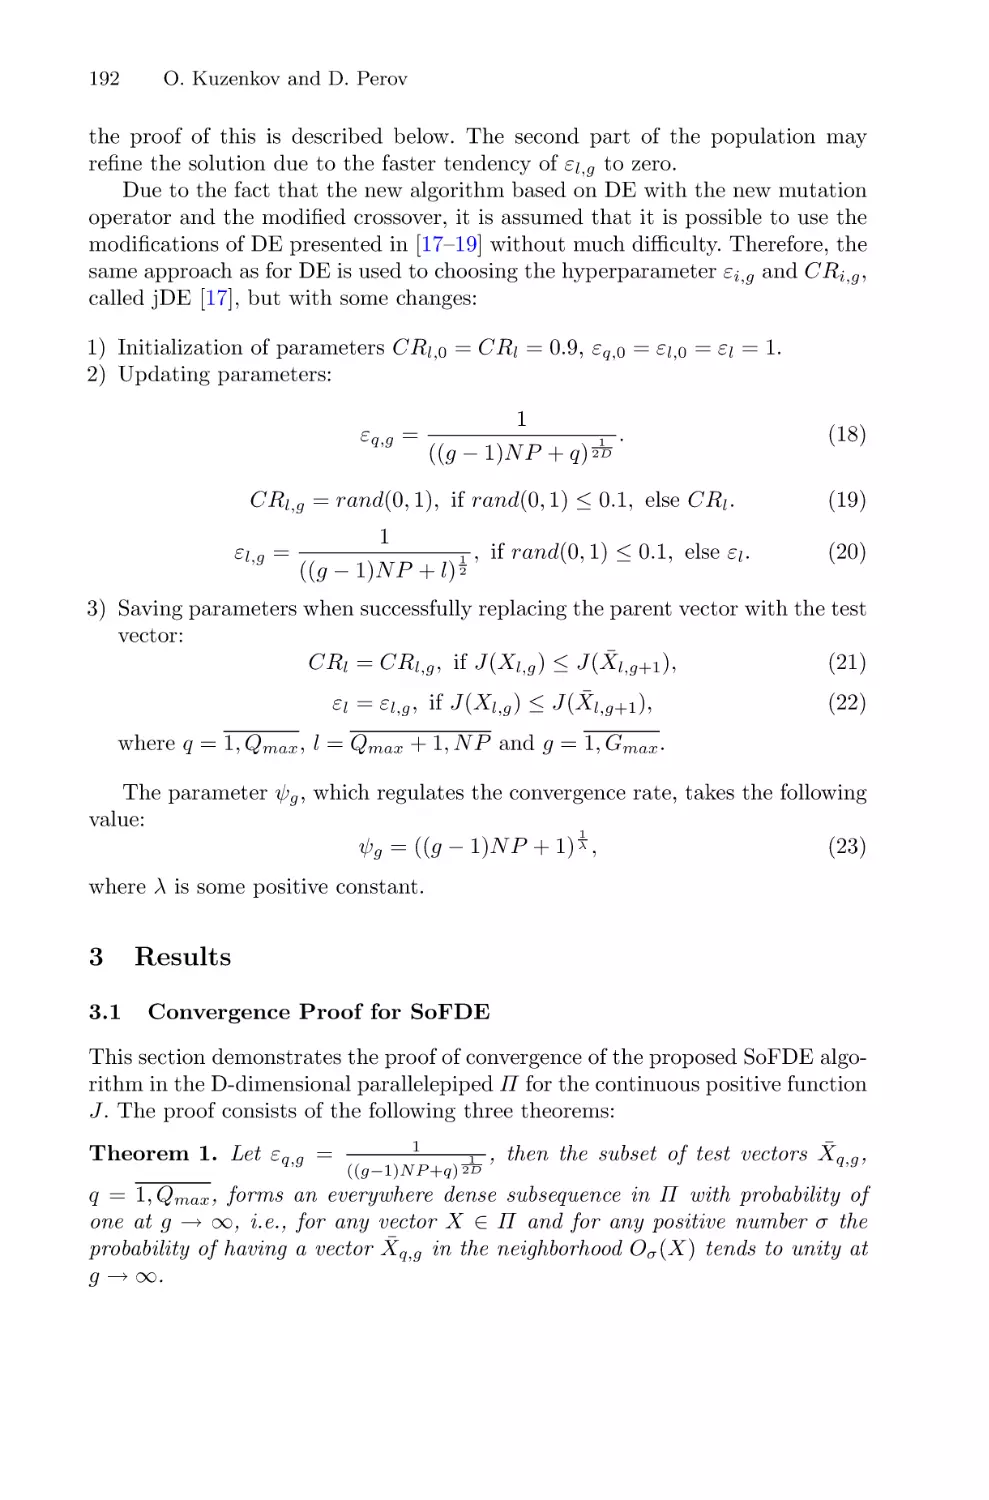 3 Results
3.1 Convergence Proof for SoFDE